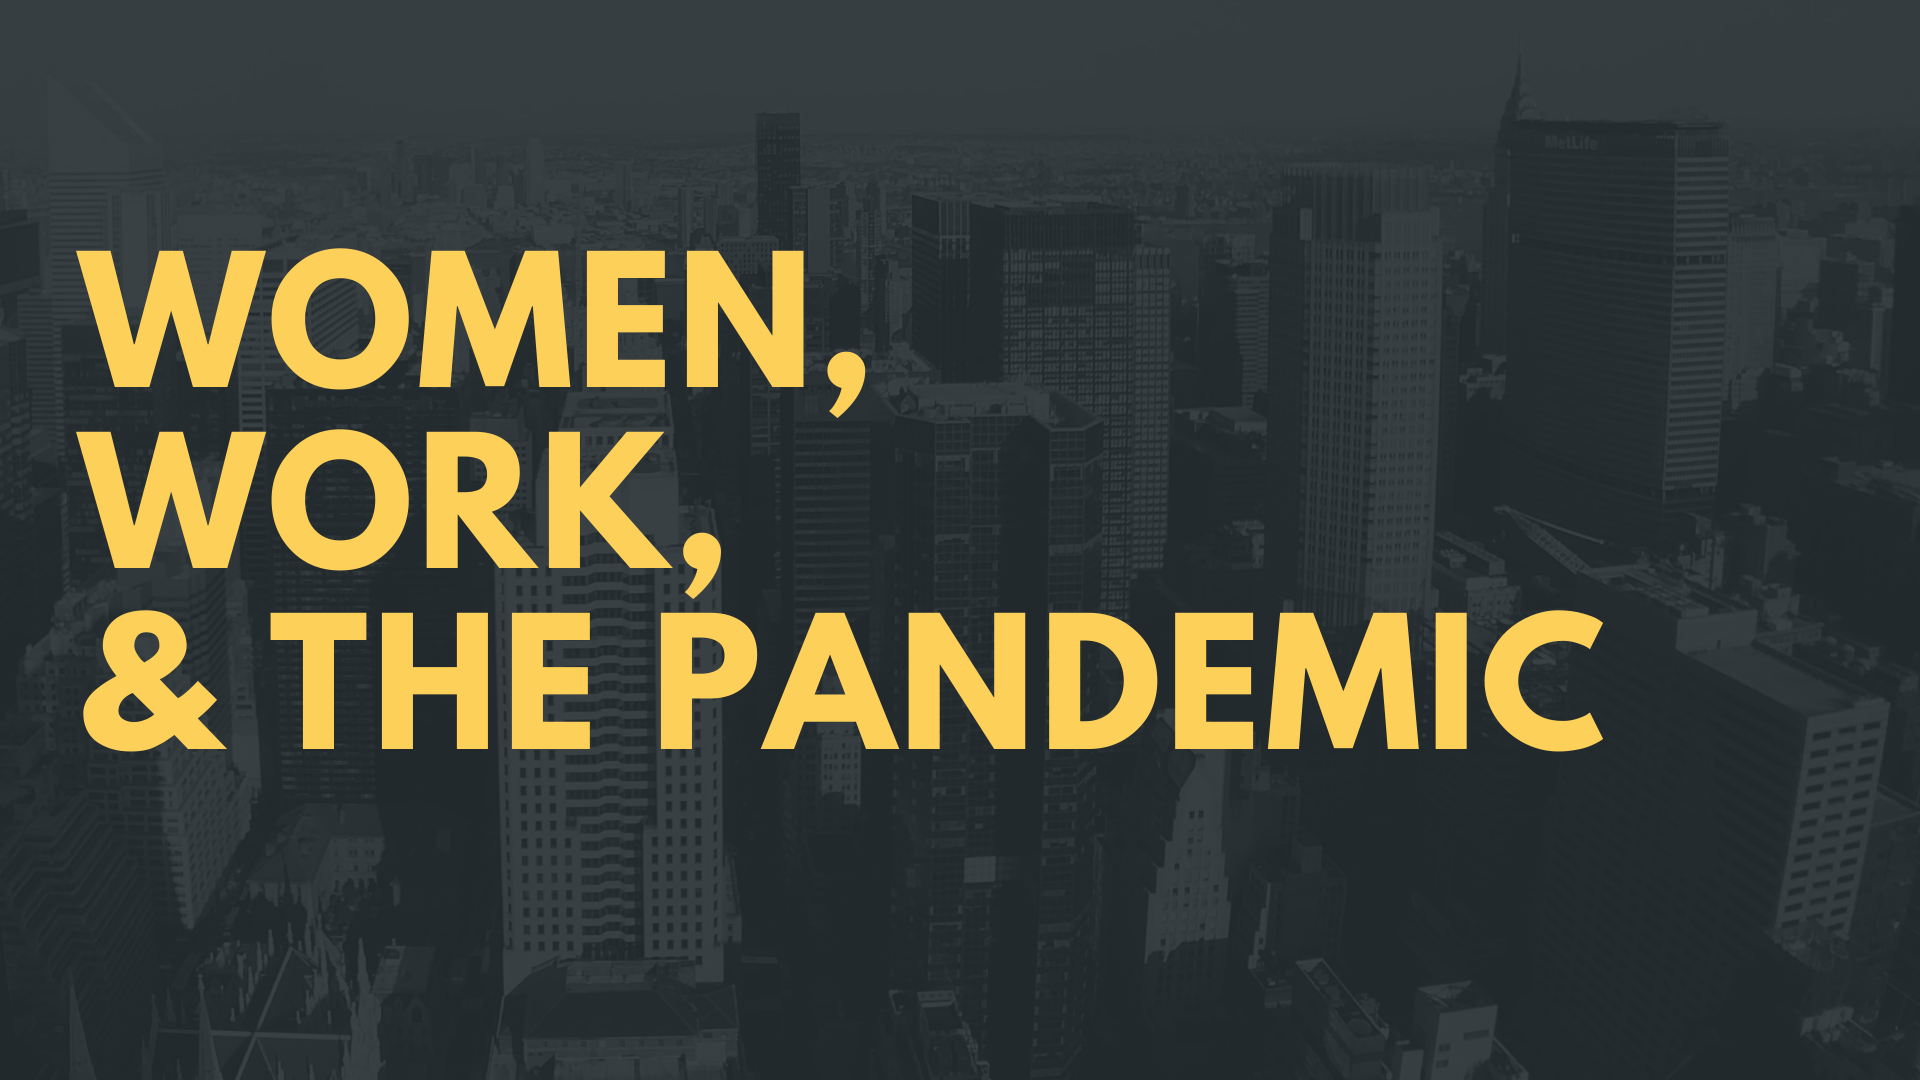 Debunking Myths About Women & Work During the Pandemic